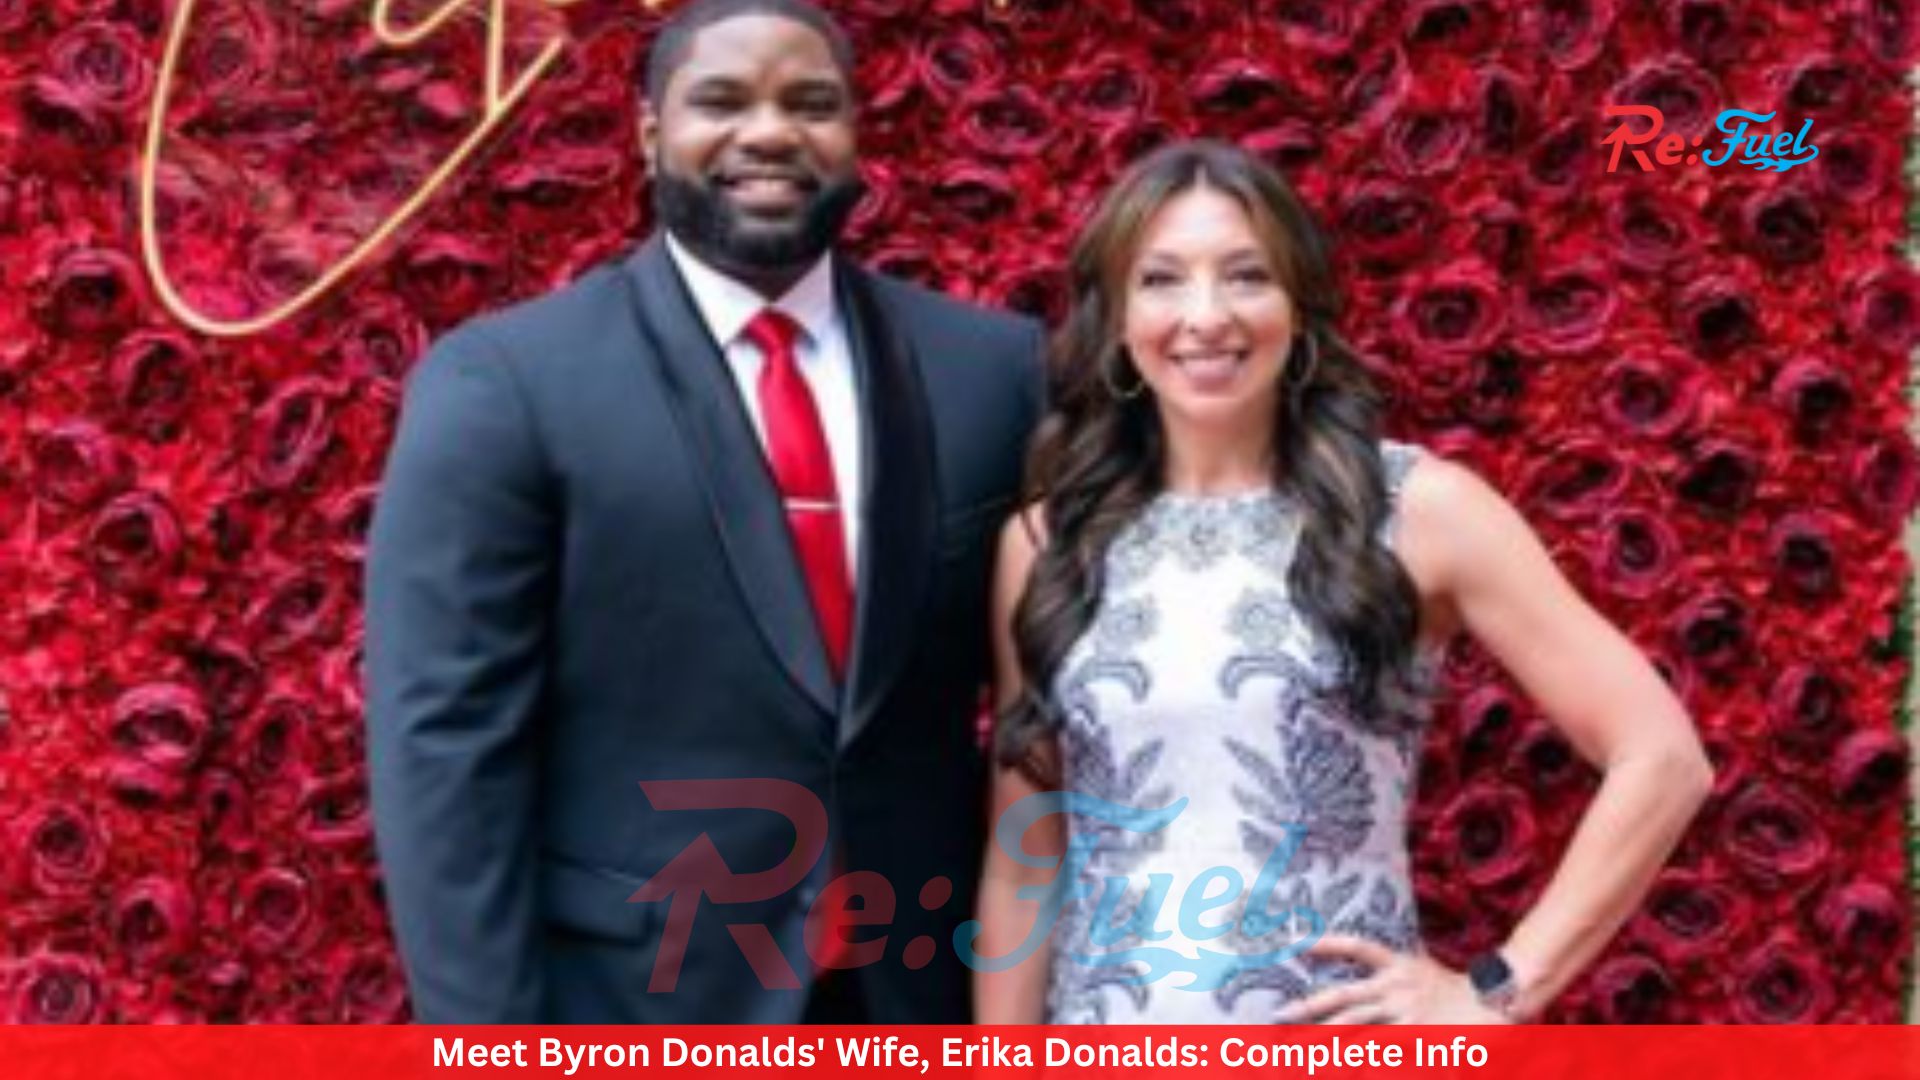 Meet Byron Donalds' Wife, Erika Donalds: Complete Info